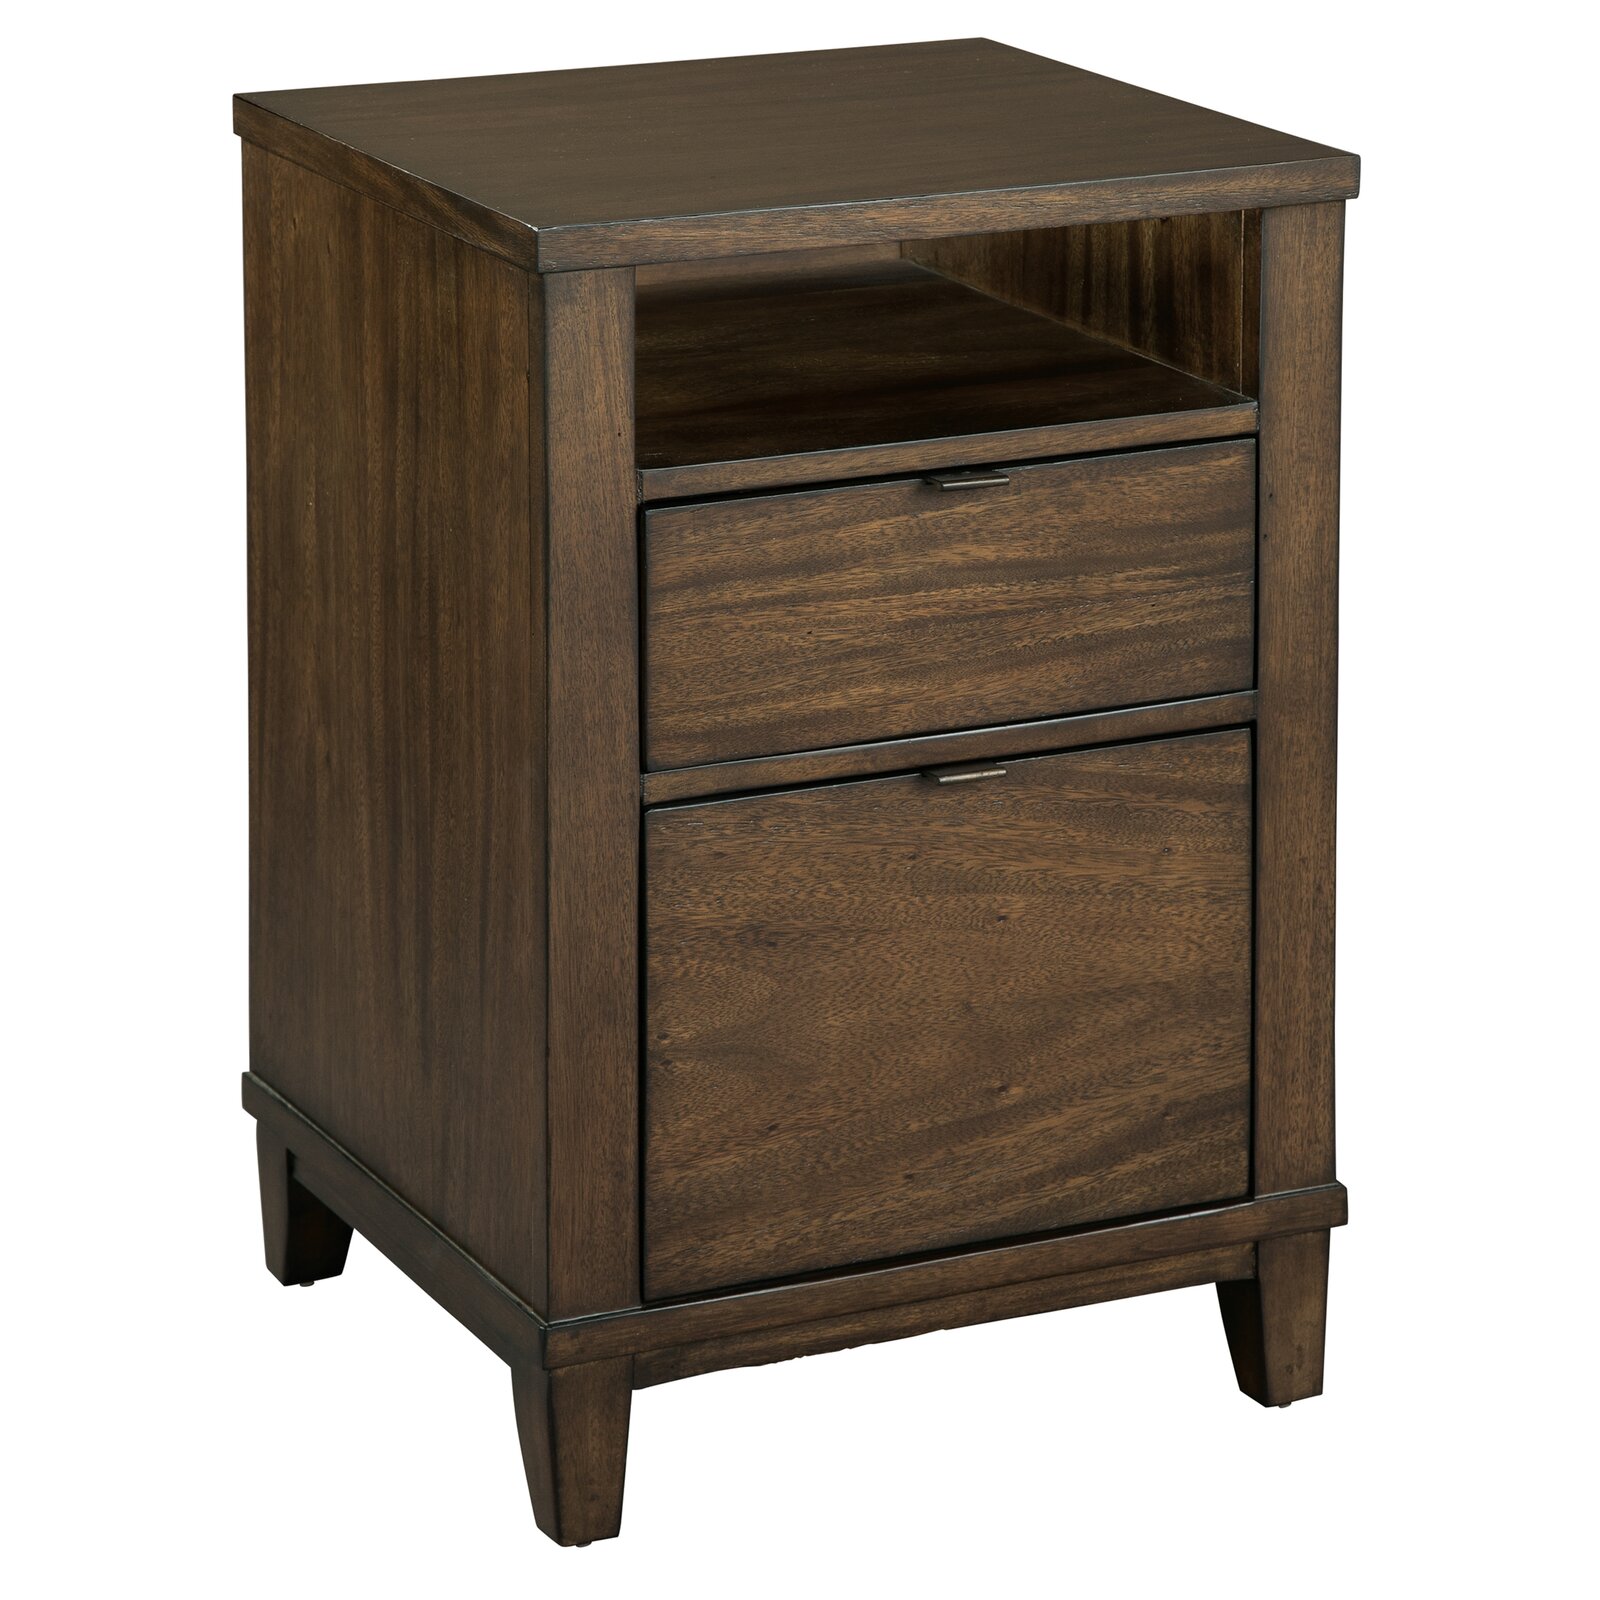 File Cabinet, Soft/Self Close Drawers, Overall: 30.75'' H x 20'' W x 18.5'' D - image 1 of 2